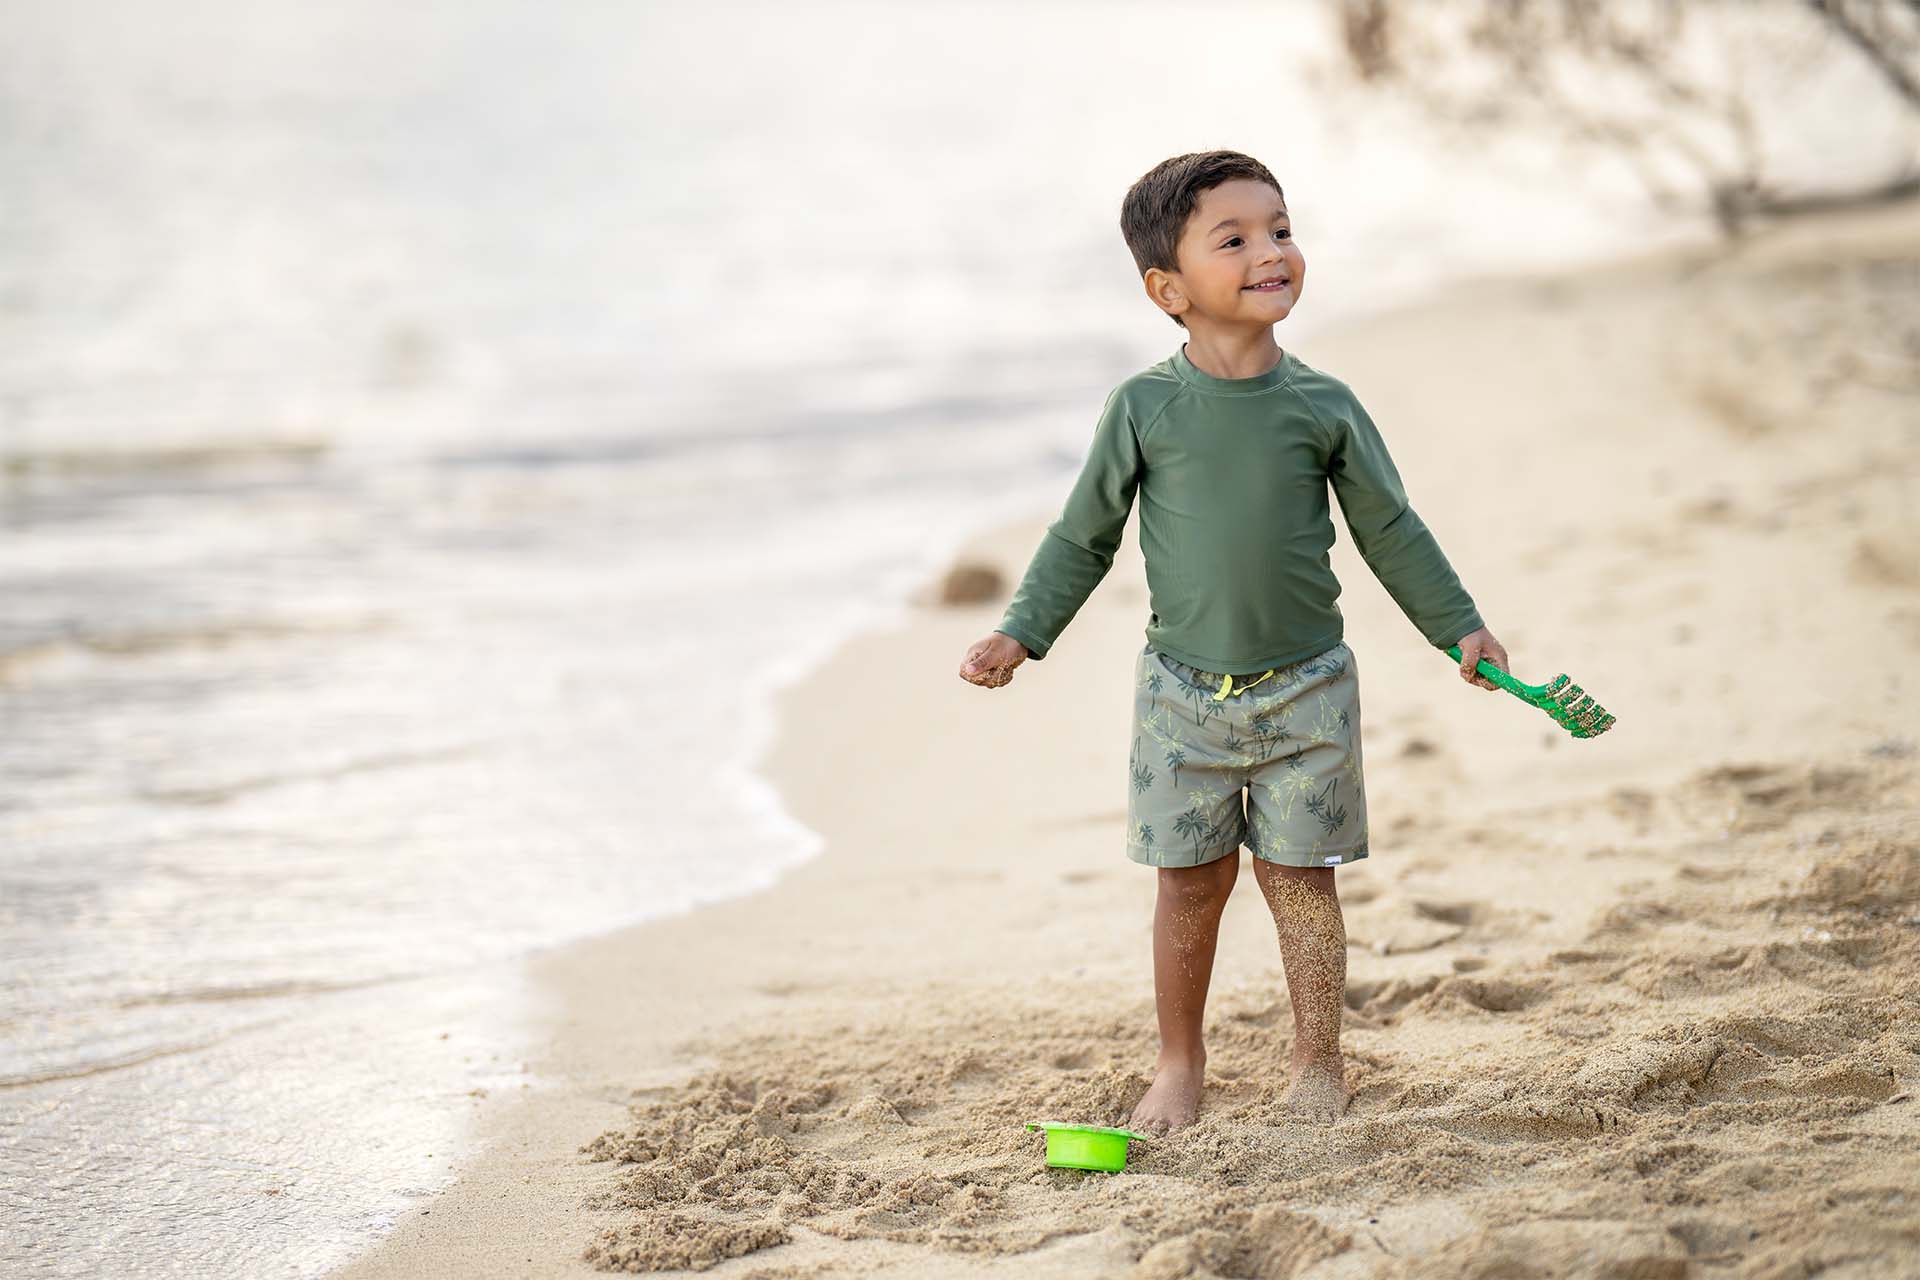 A toddler boy in a green rash guard shirt and green swim trunks with a toy shovel standing on a sandy beach looking cheerful.